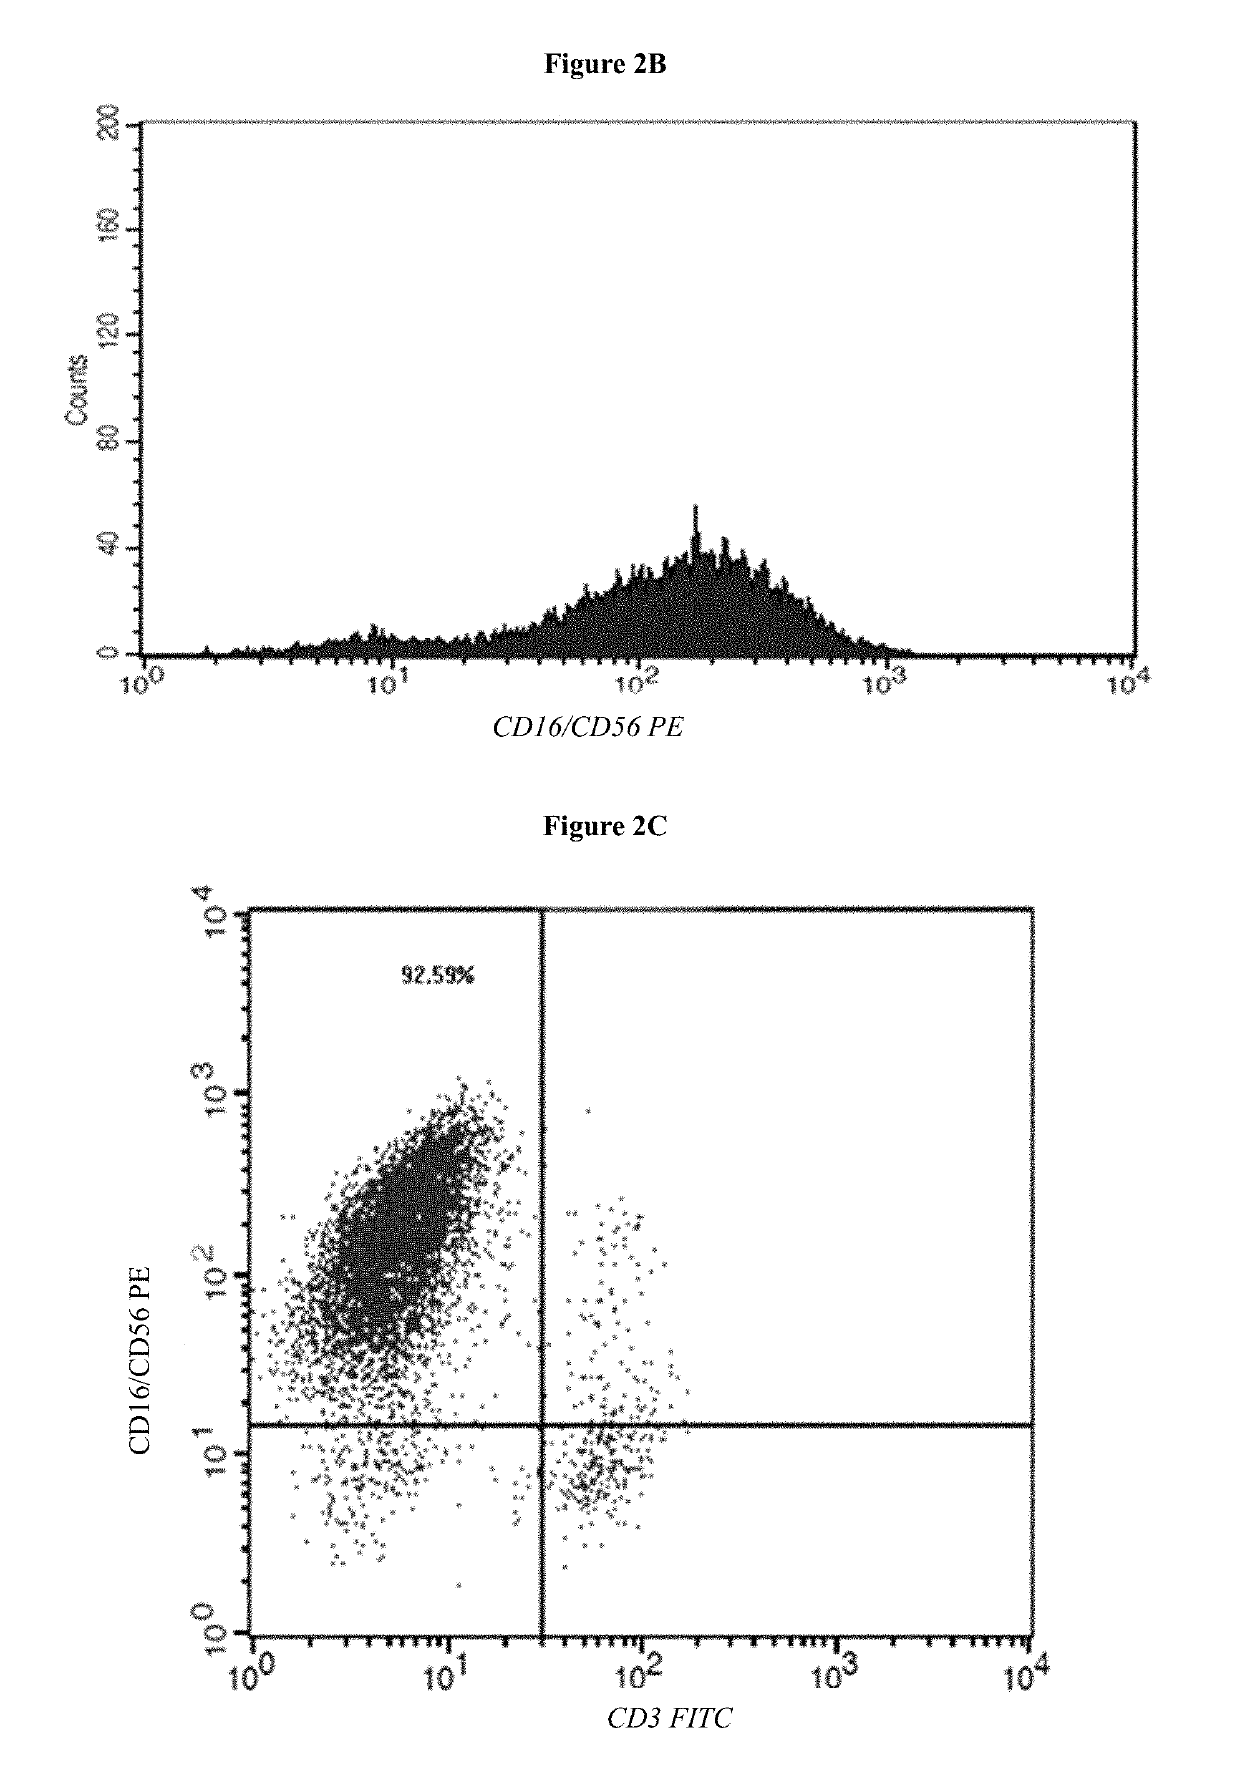 Medium system and method for ex vivo expansion of NK cells